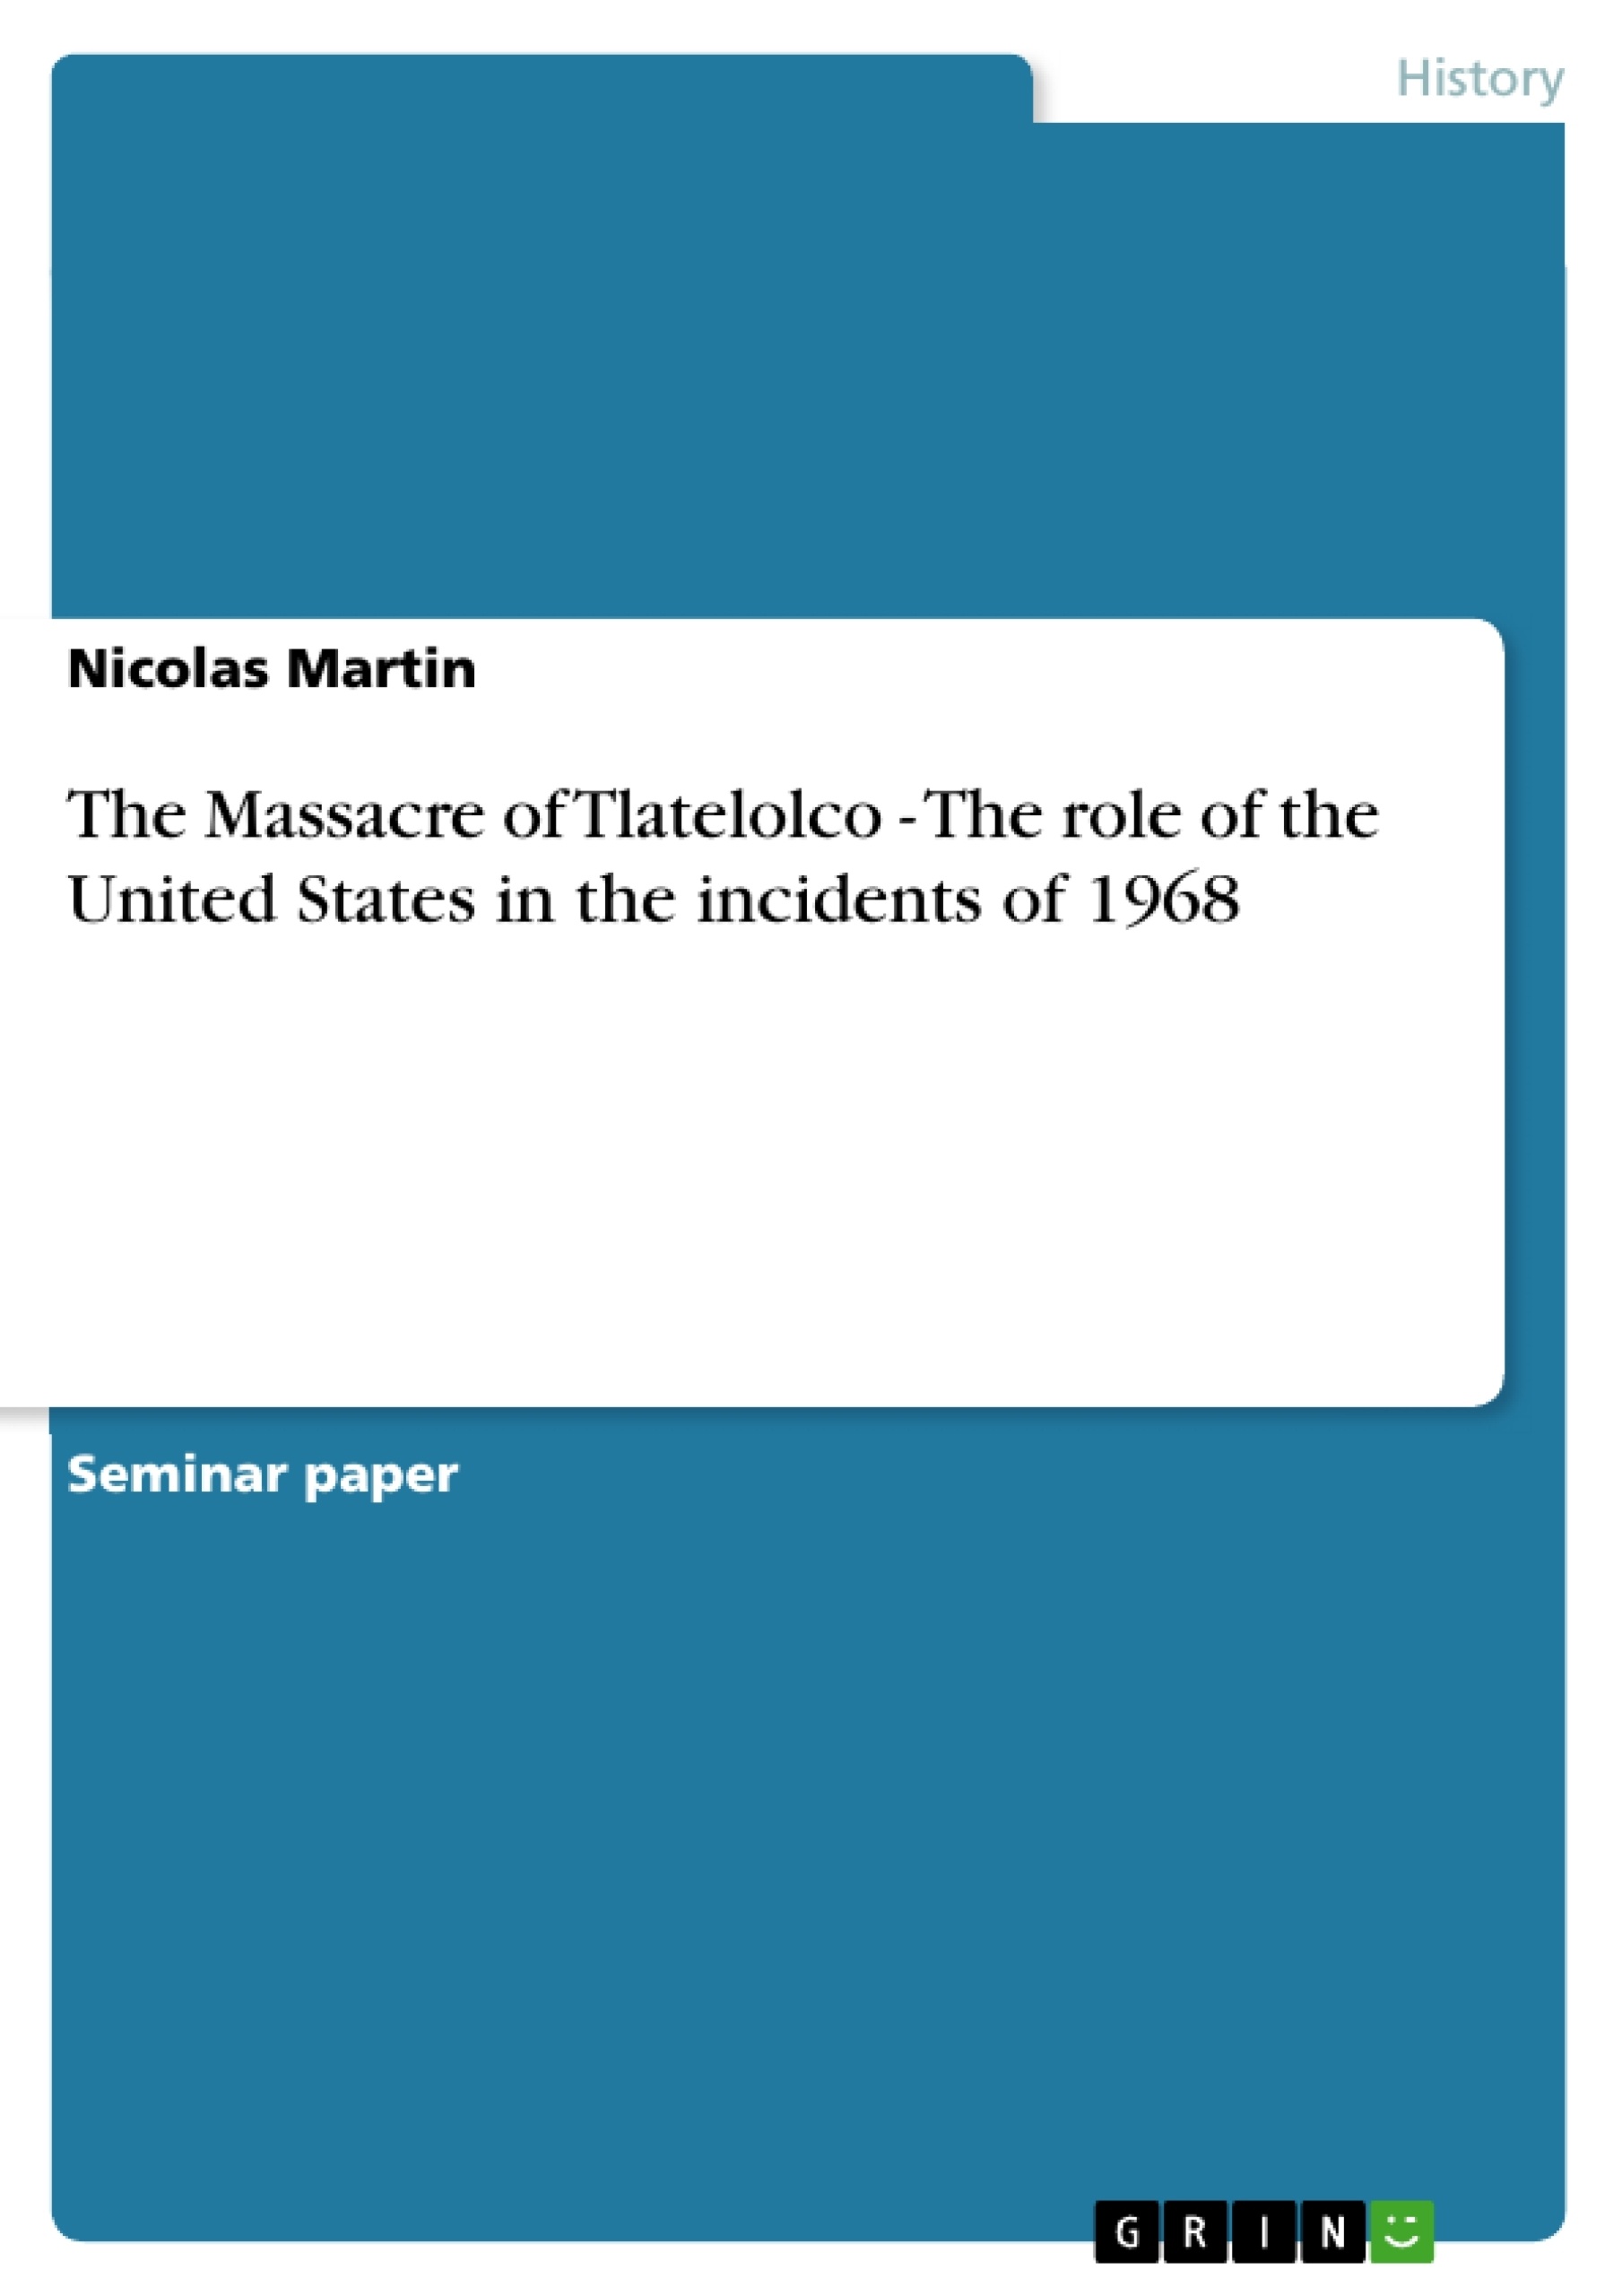 Título: The Massacre of Tlatelolco - The role of the United States in the incidents of 1968